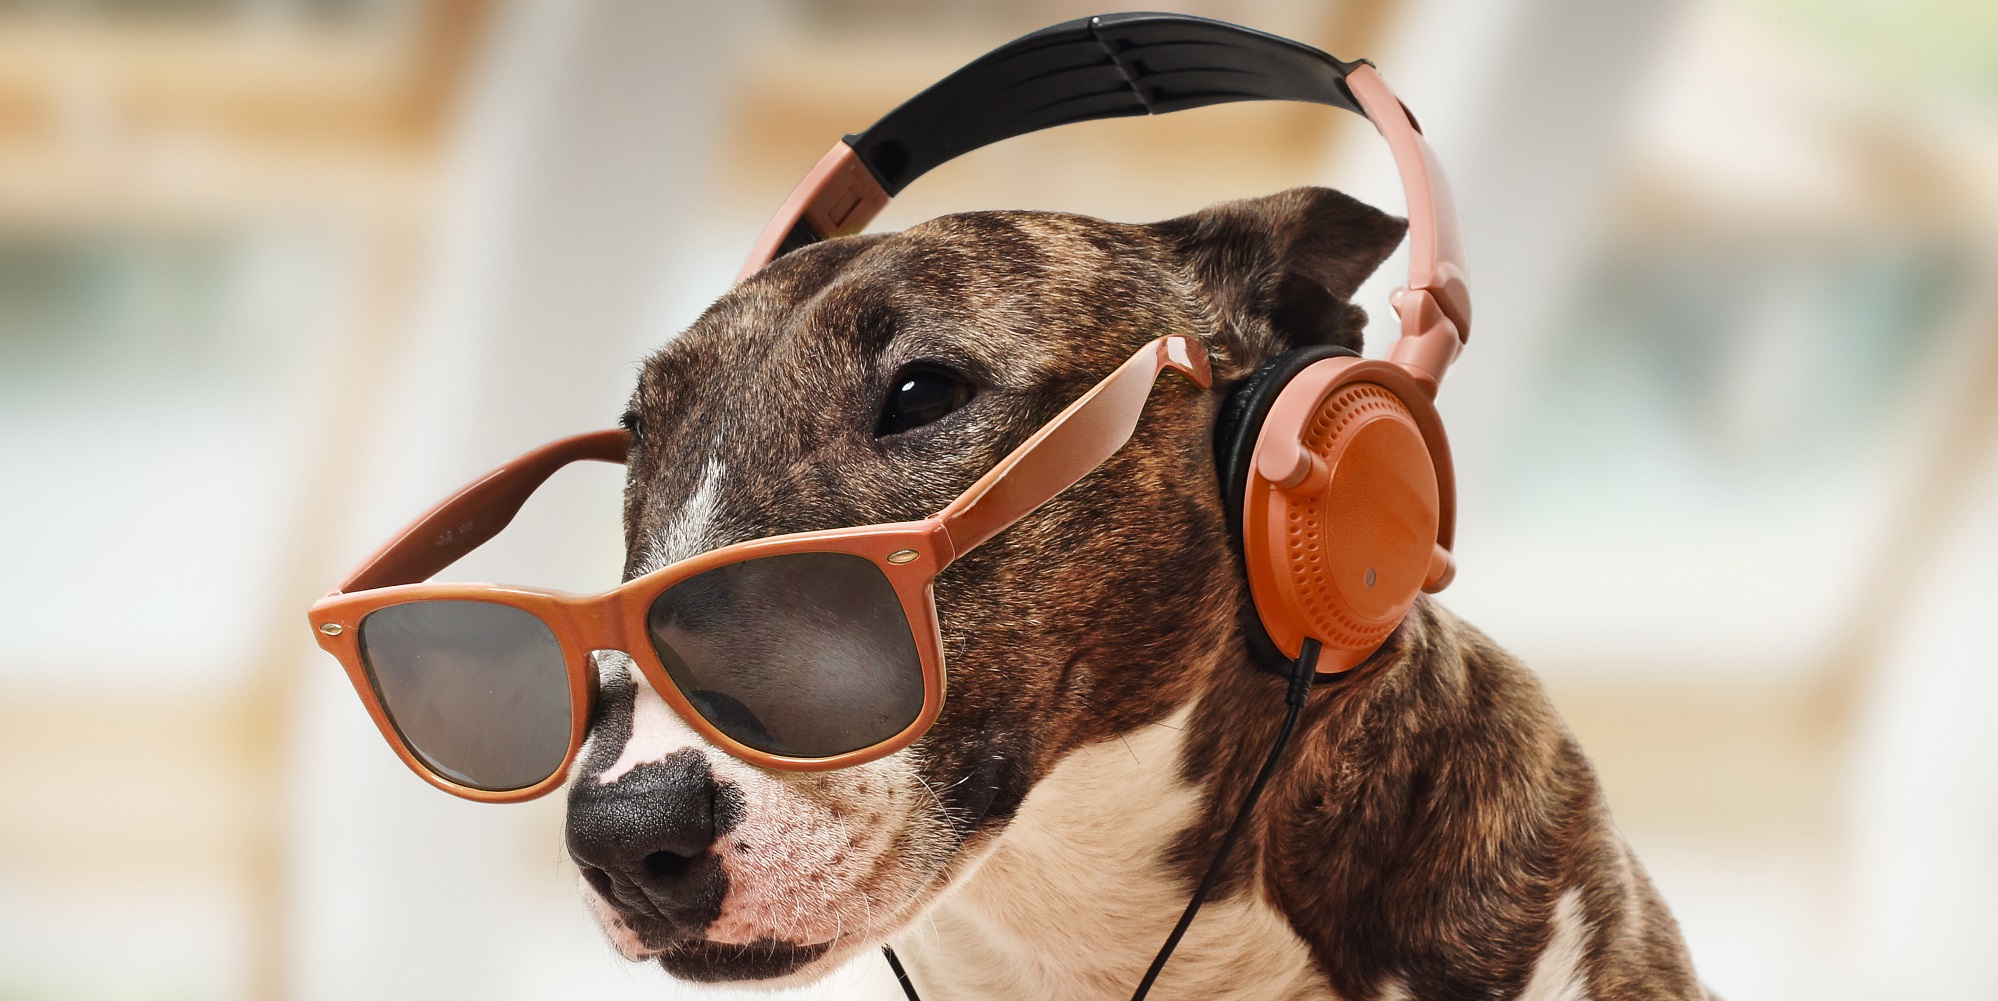 Which Big Dog And Small Dog Are You A Combination Of? 🐶 Quiz Miniature Bull Terrier is listening to music